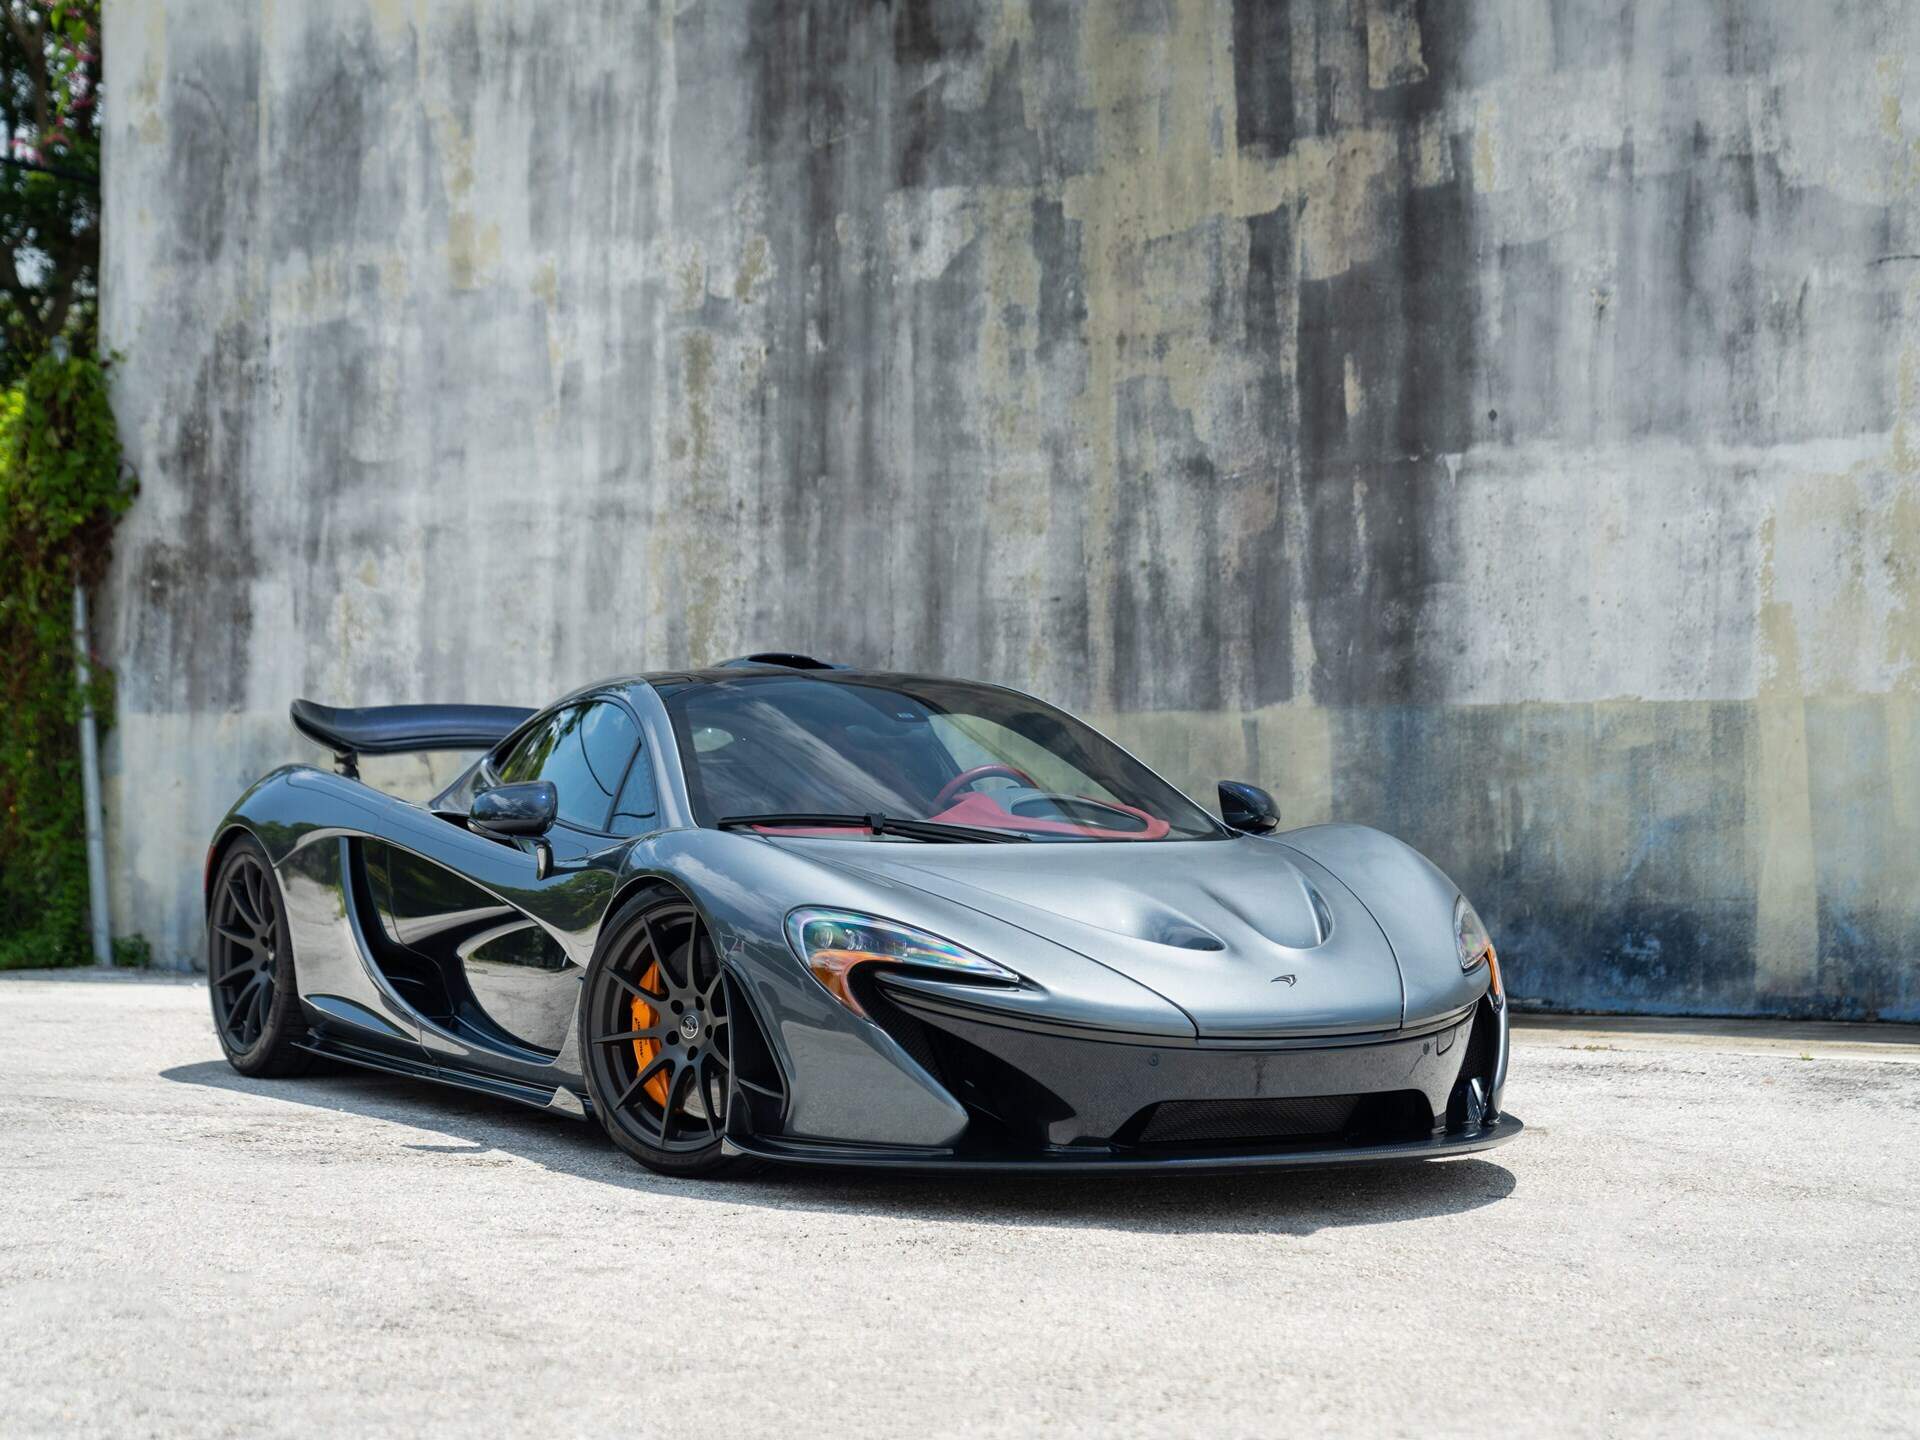 front angled view of a grey 2015 McLaren P1